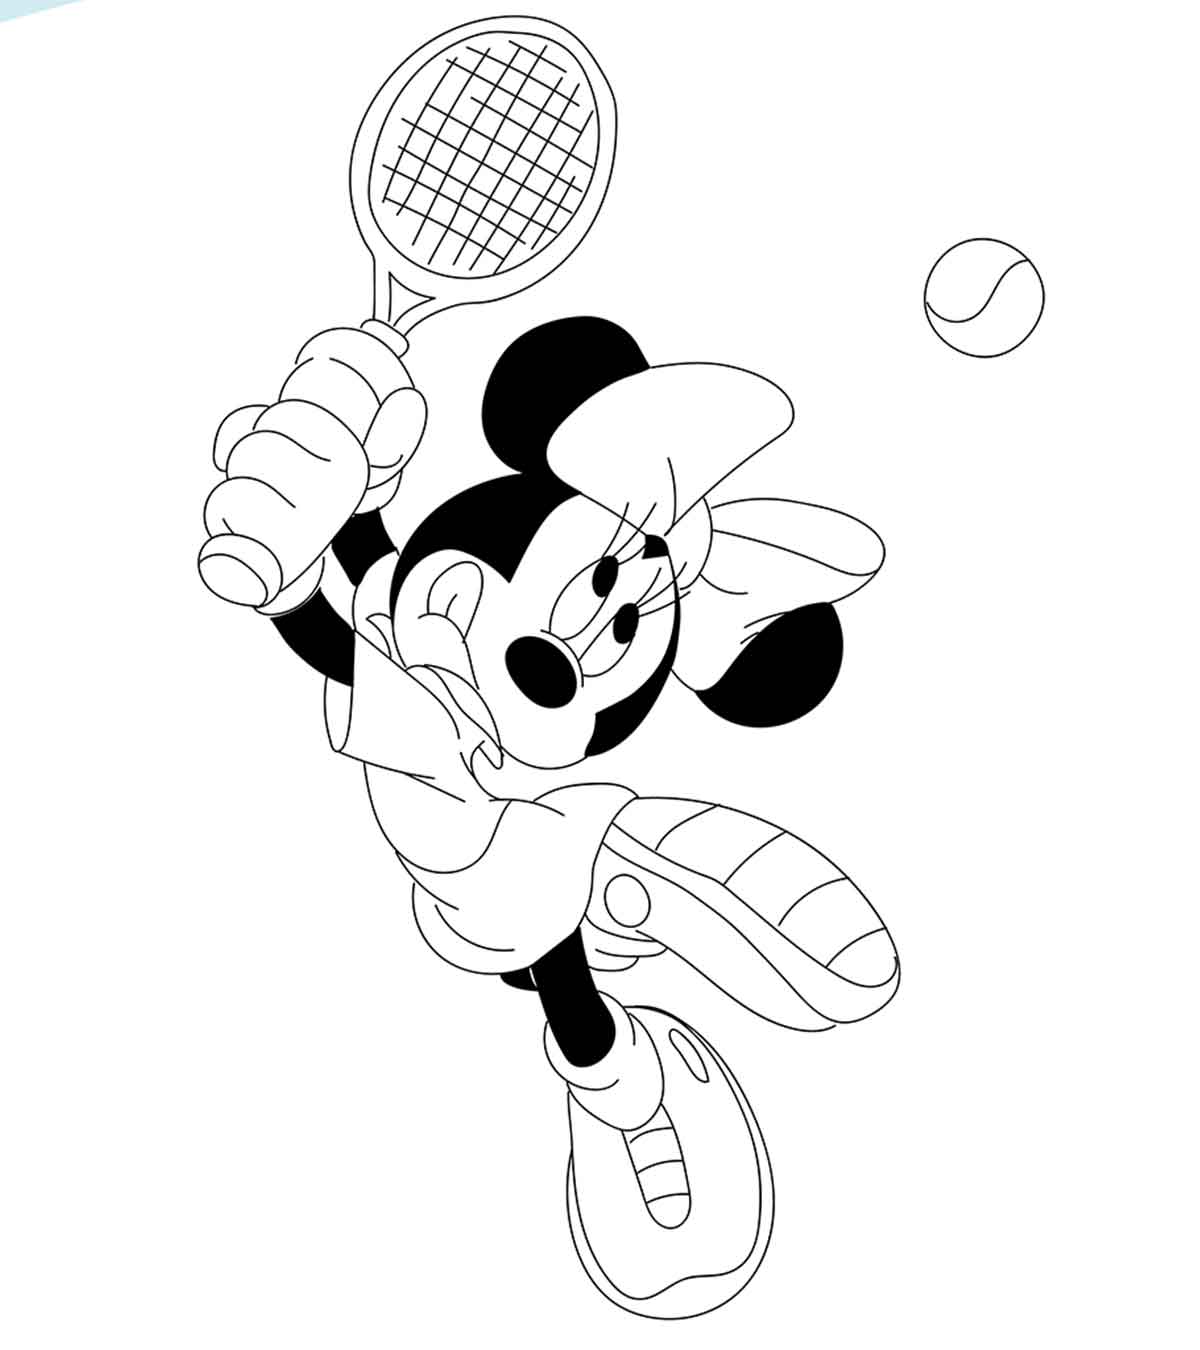 Download Tennis Ball Coloring Pages - Coloring Home